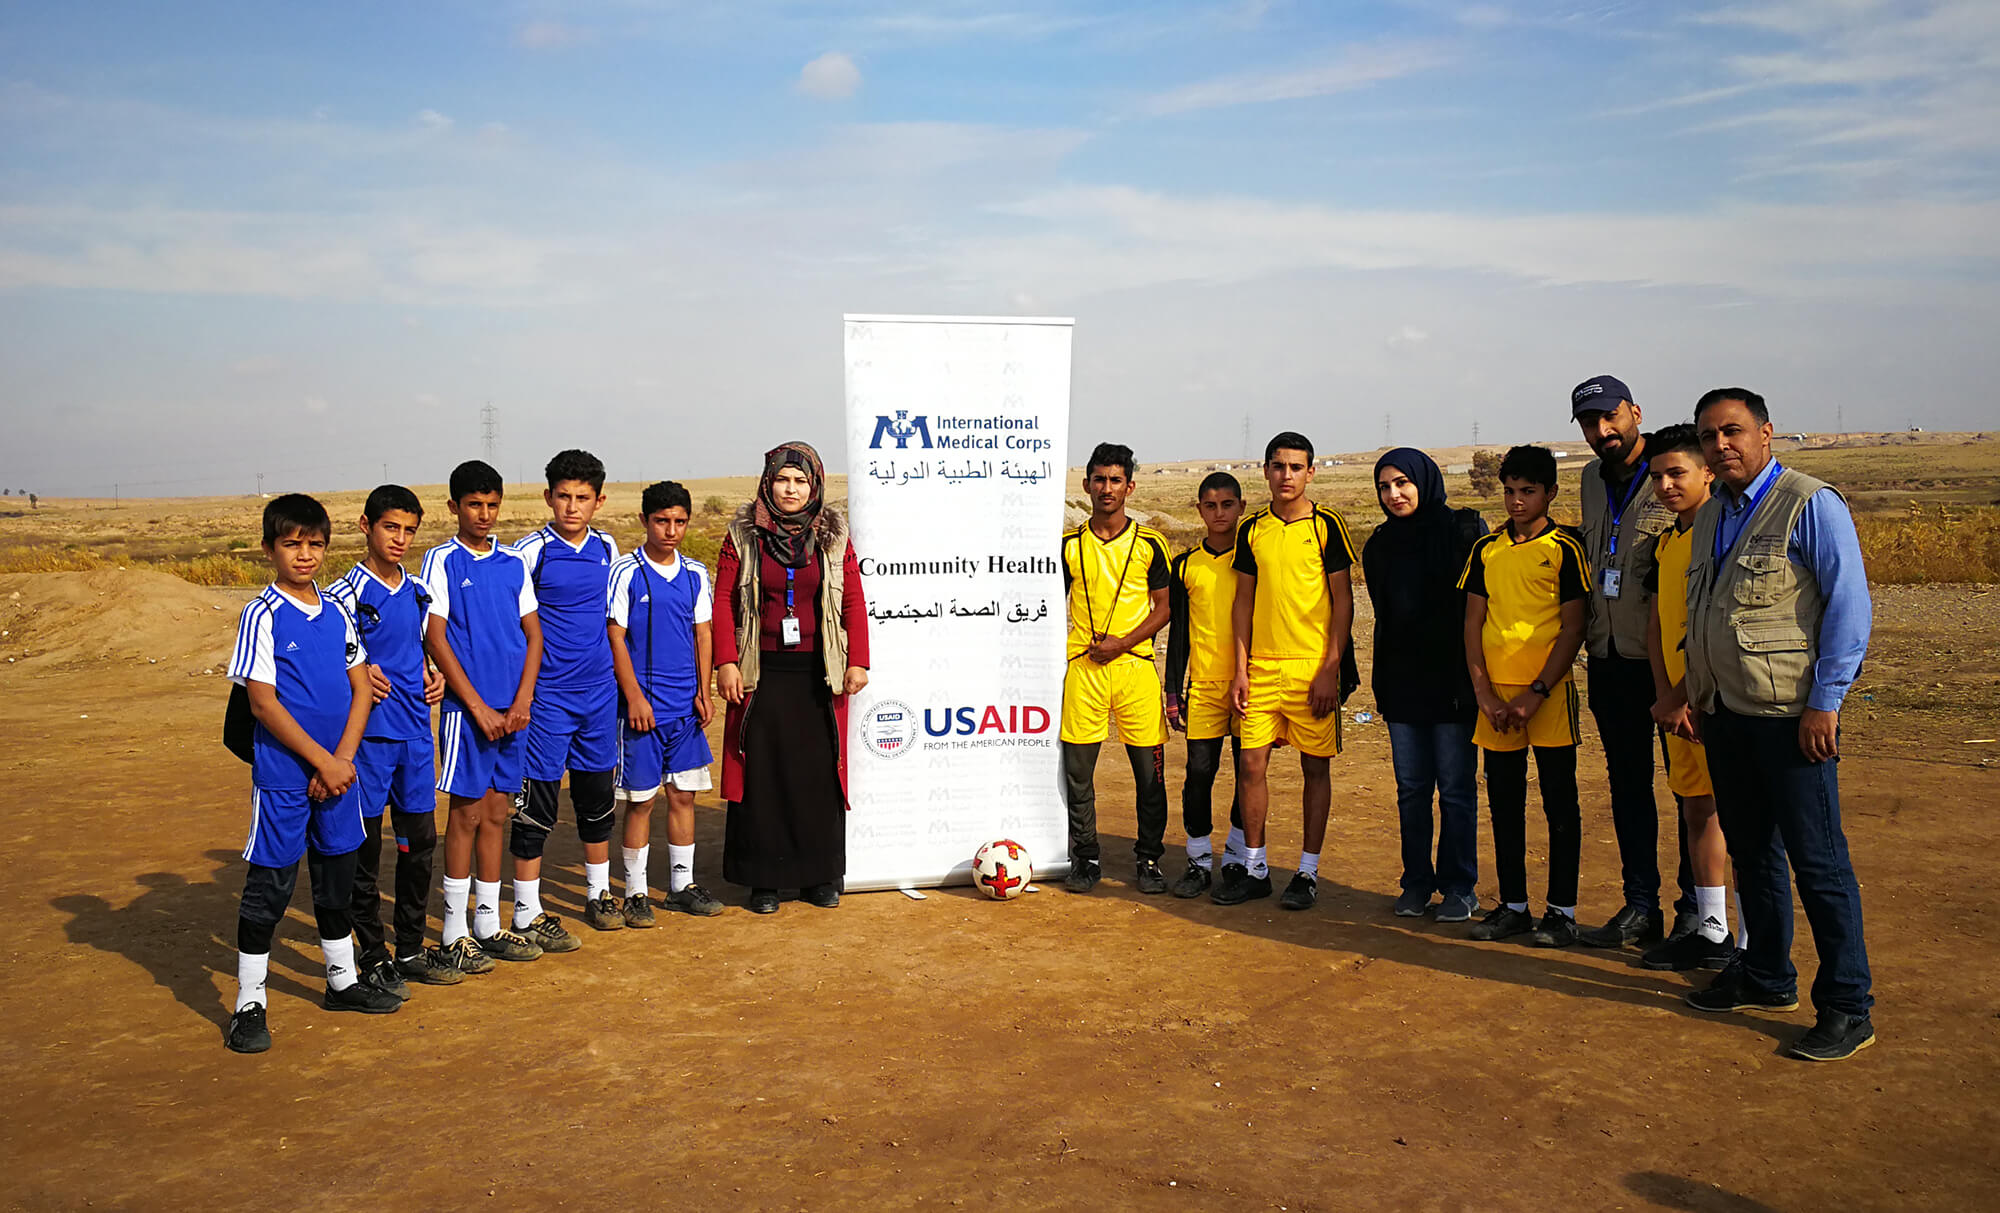 Hamsa Mohammed attends a sporting event in Khazir camp to raise awareness of community health.